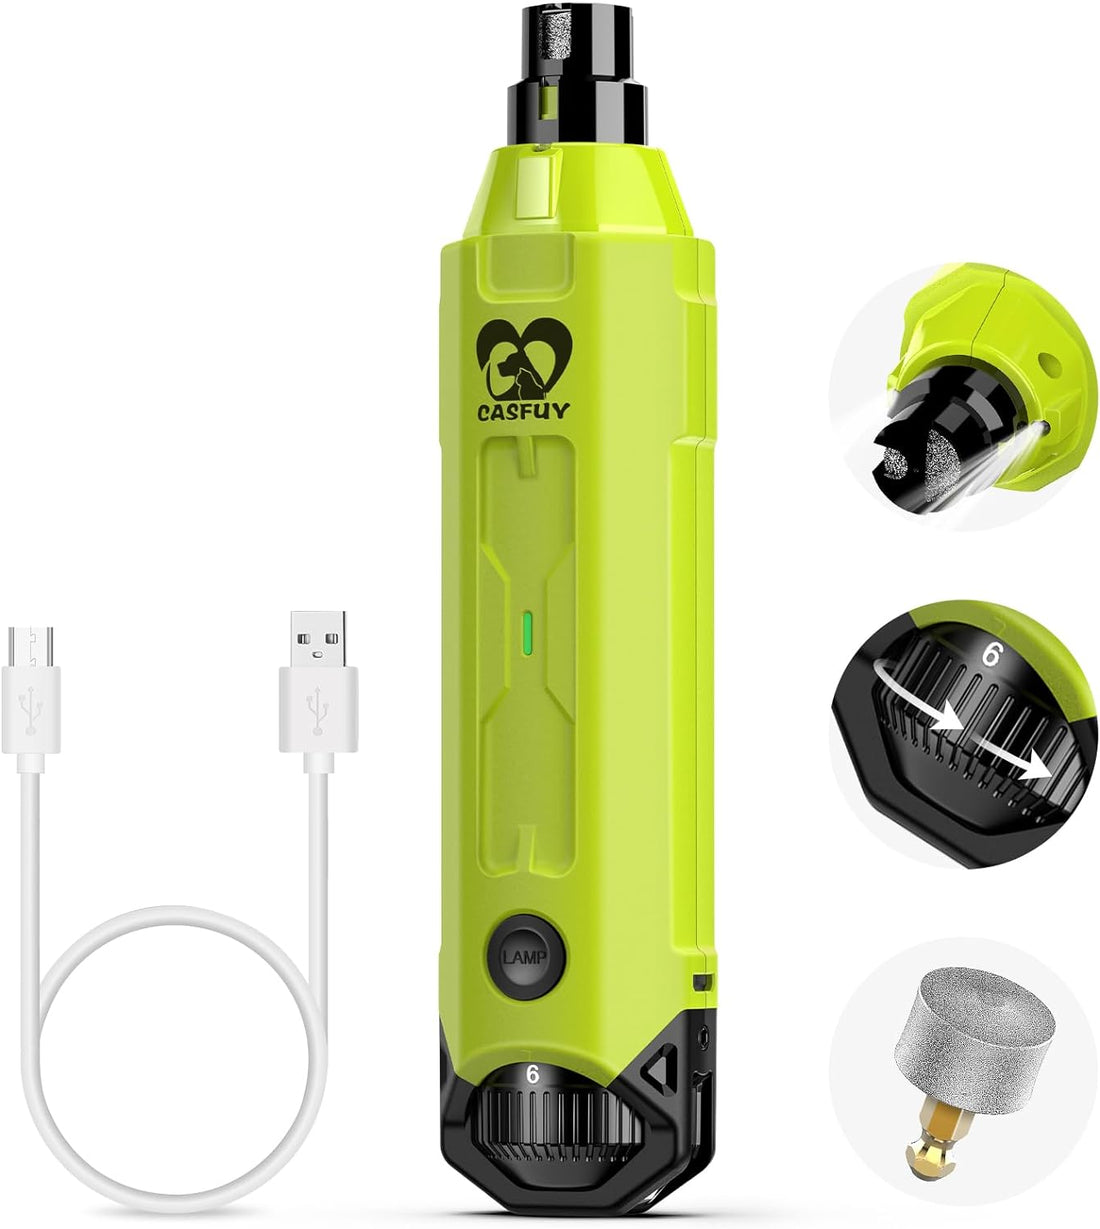 6-Speed Dog Nail Grinder with 2 LED Lights- Newest Pet Nail Grinder Rechargeable Quiet Electric Dog Nail Trimmer for Large Medium Small Dogs Painless Paws Grooming & Smoothing Tool (Green)